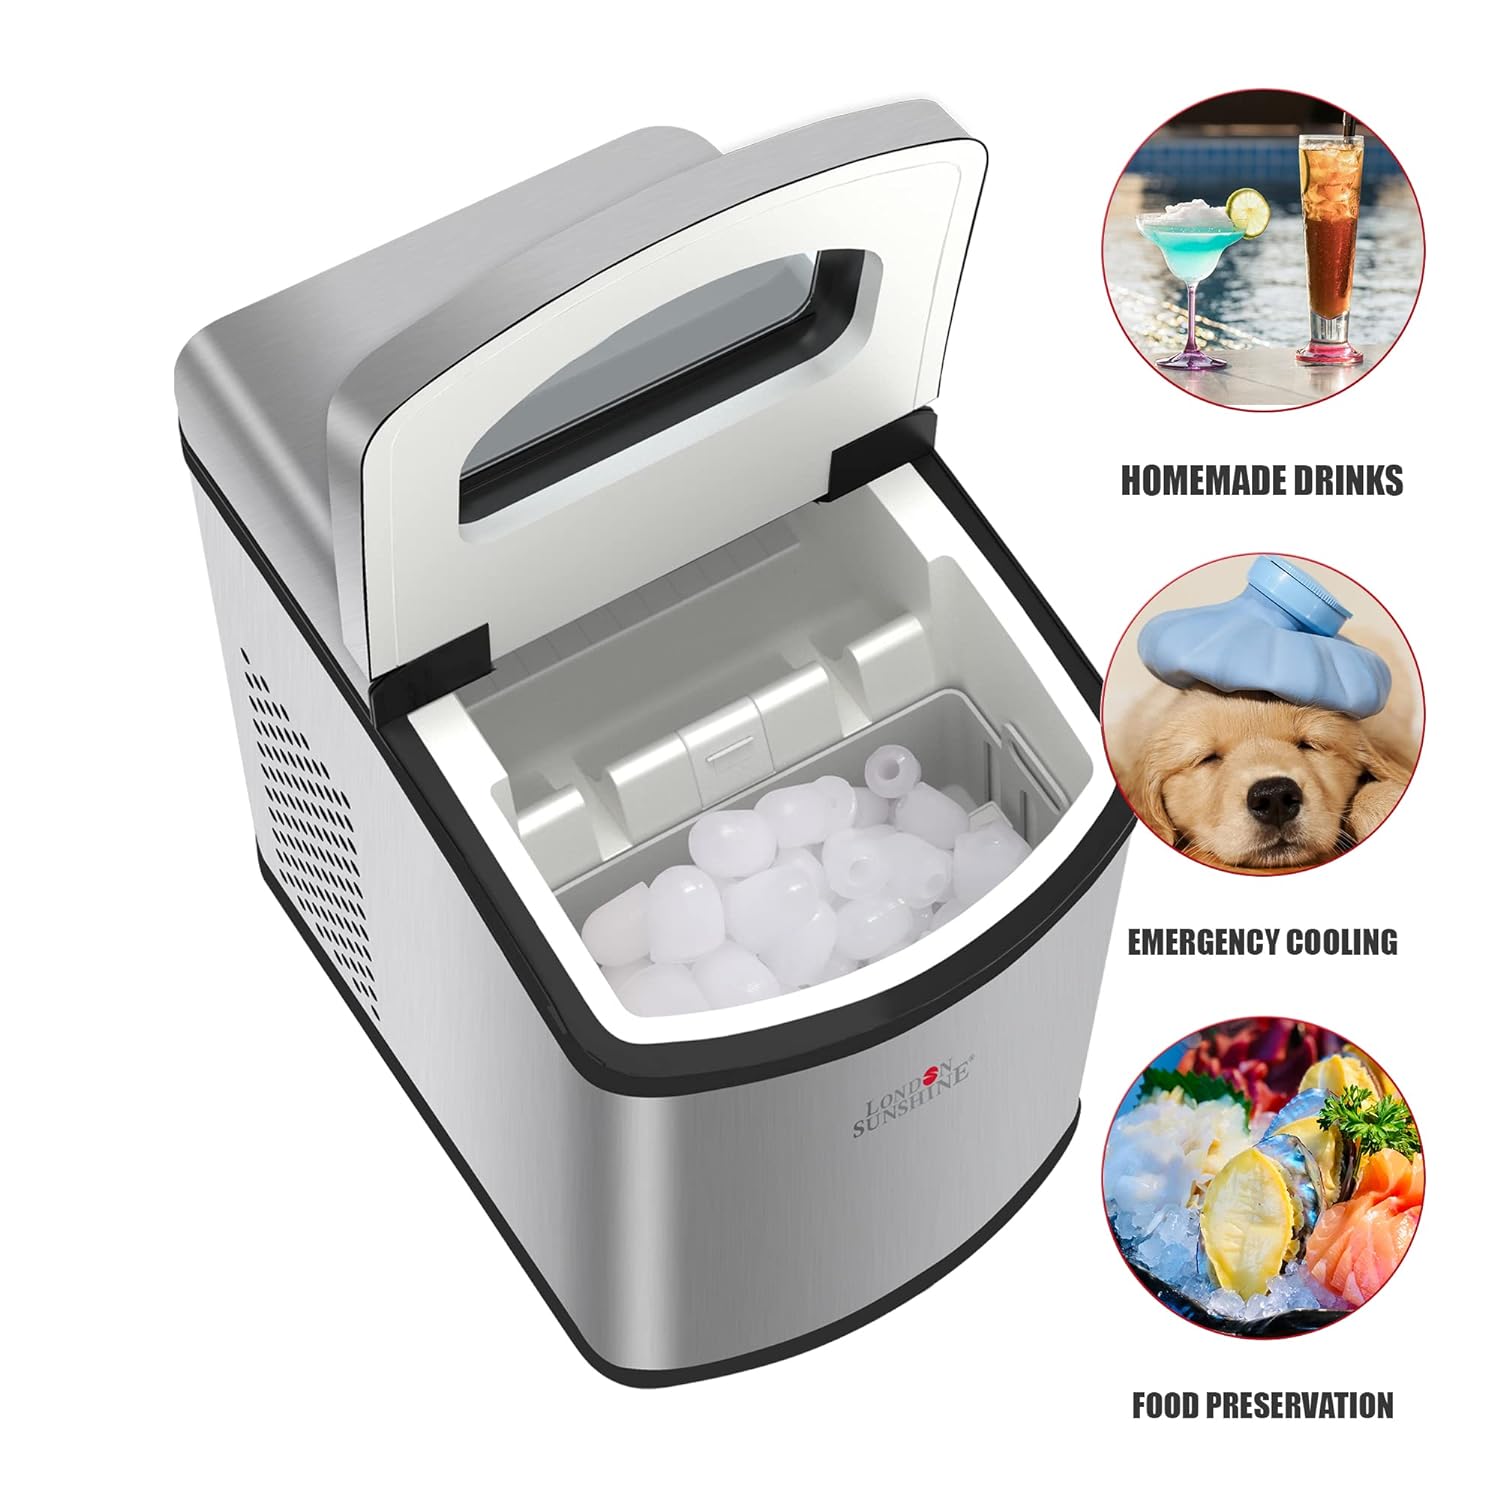 London Sunshine Stainless Steel Portable Ice Maker Review